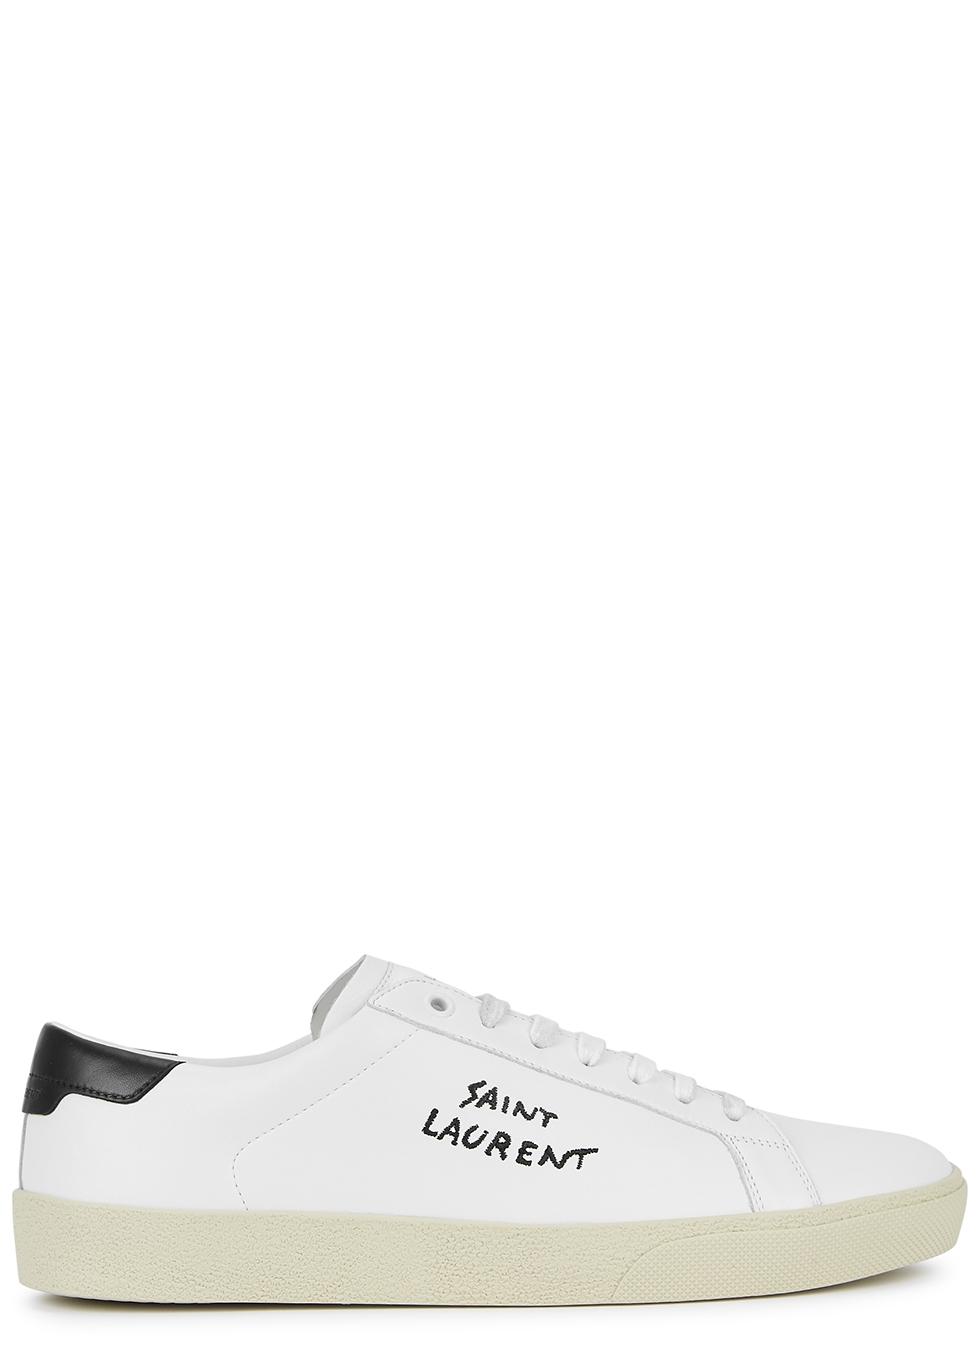 Saint Laurent Court White Leather Sneakers - Lyst